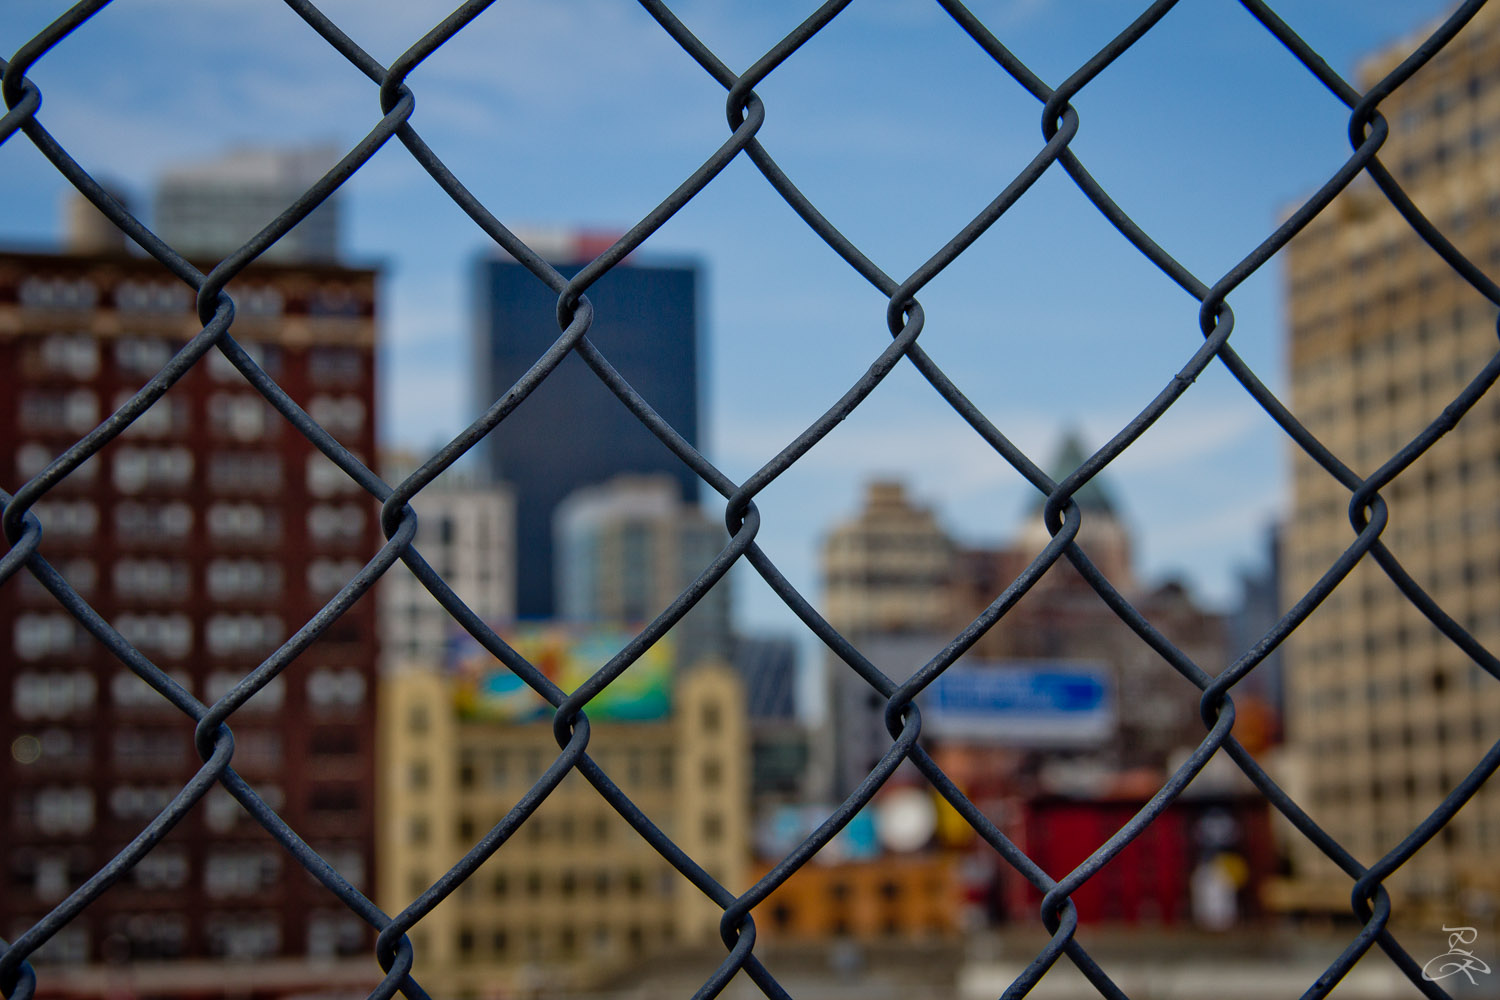 A caged view from the highline. Manhattan, NY.